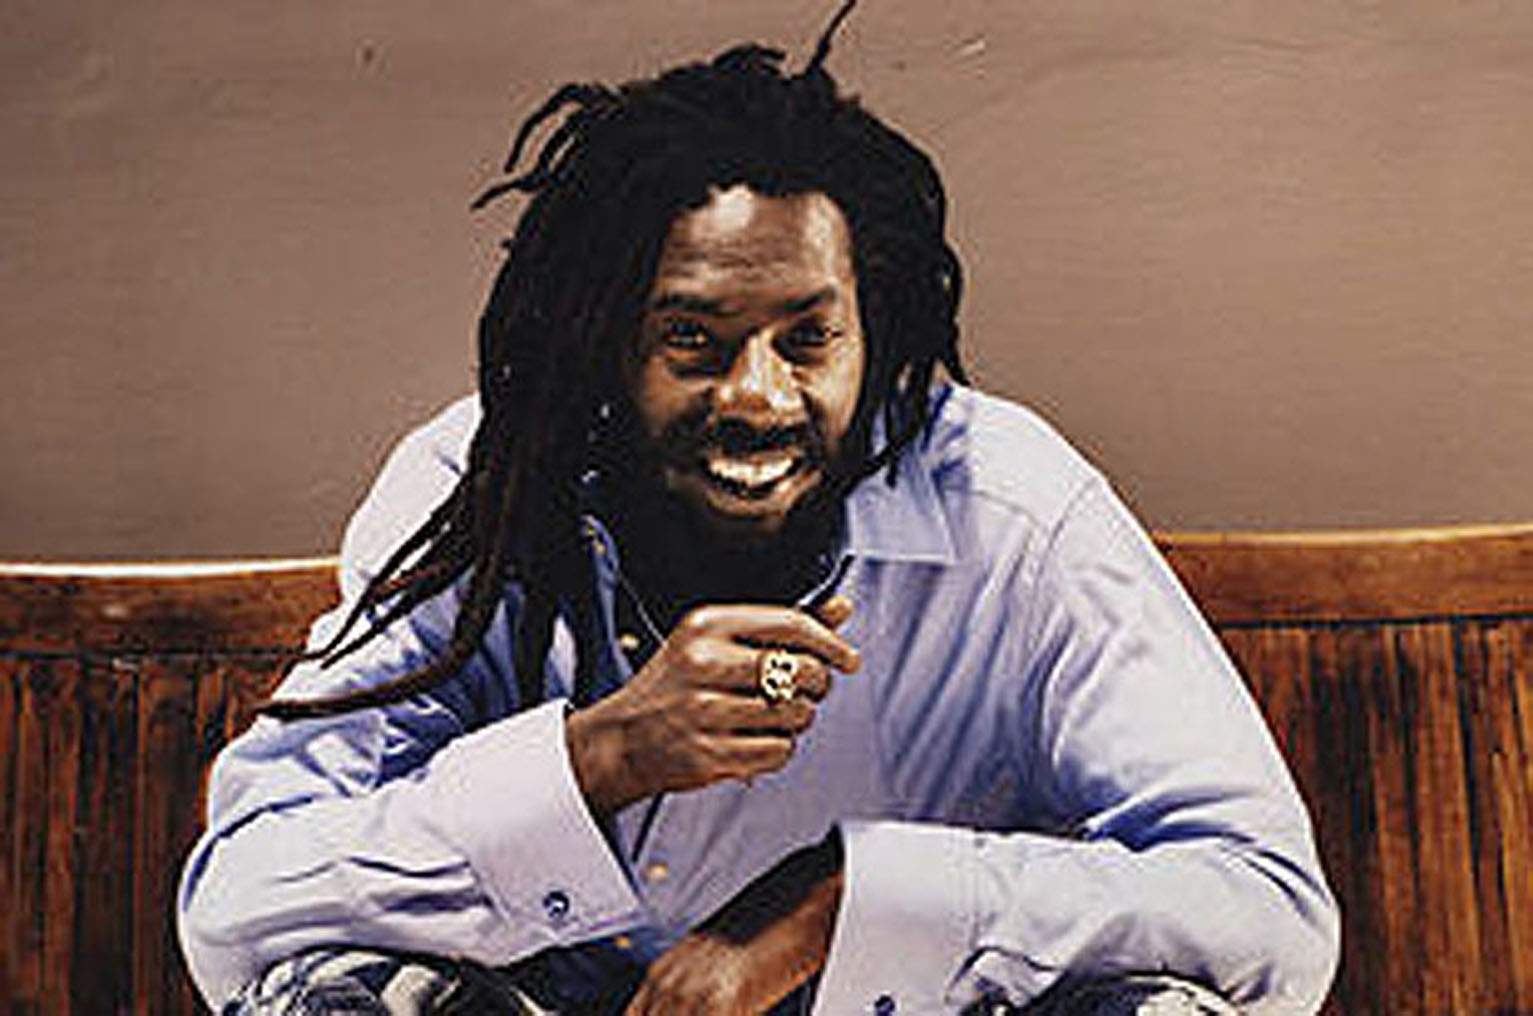 A HAPPY BIRTHDAY TO LEADING JAMAICAN REGGAE ARTISTE BUJU BANTON.  Do have a great day!!  